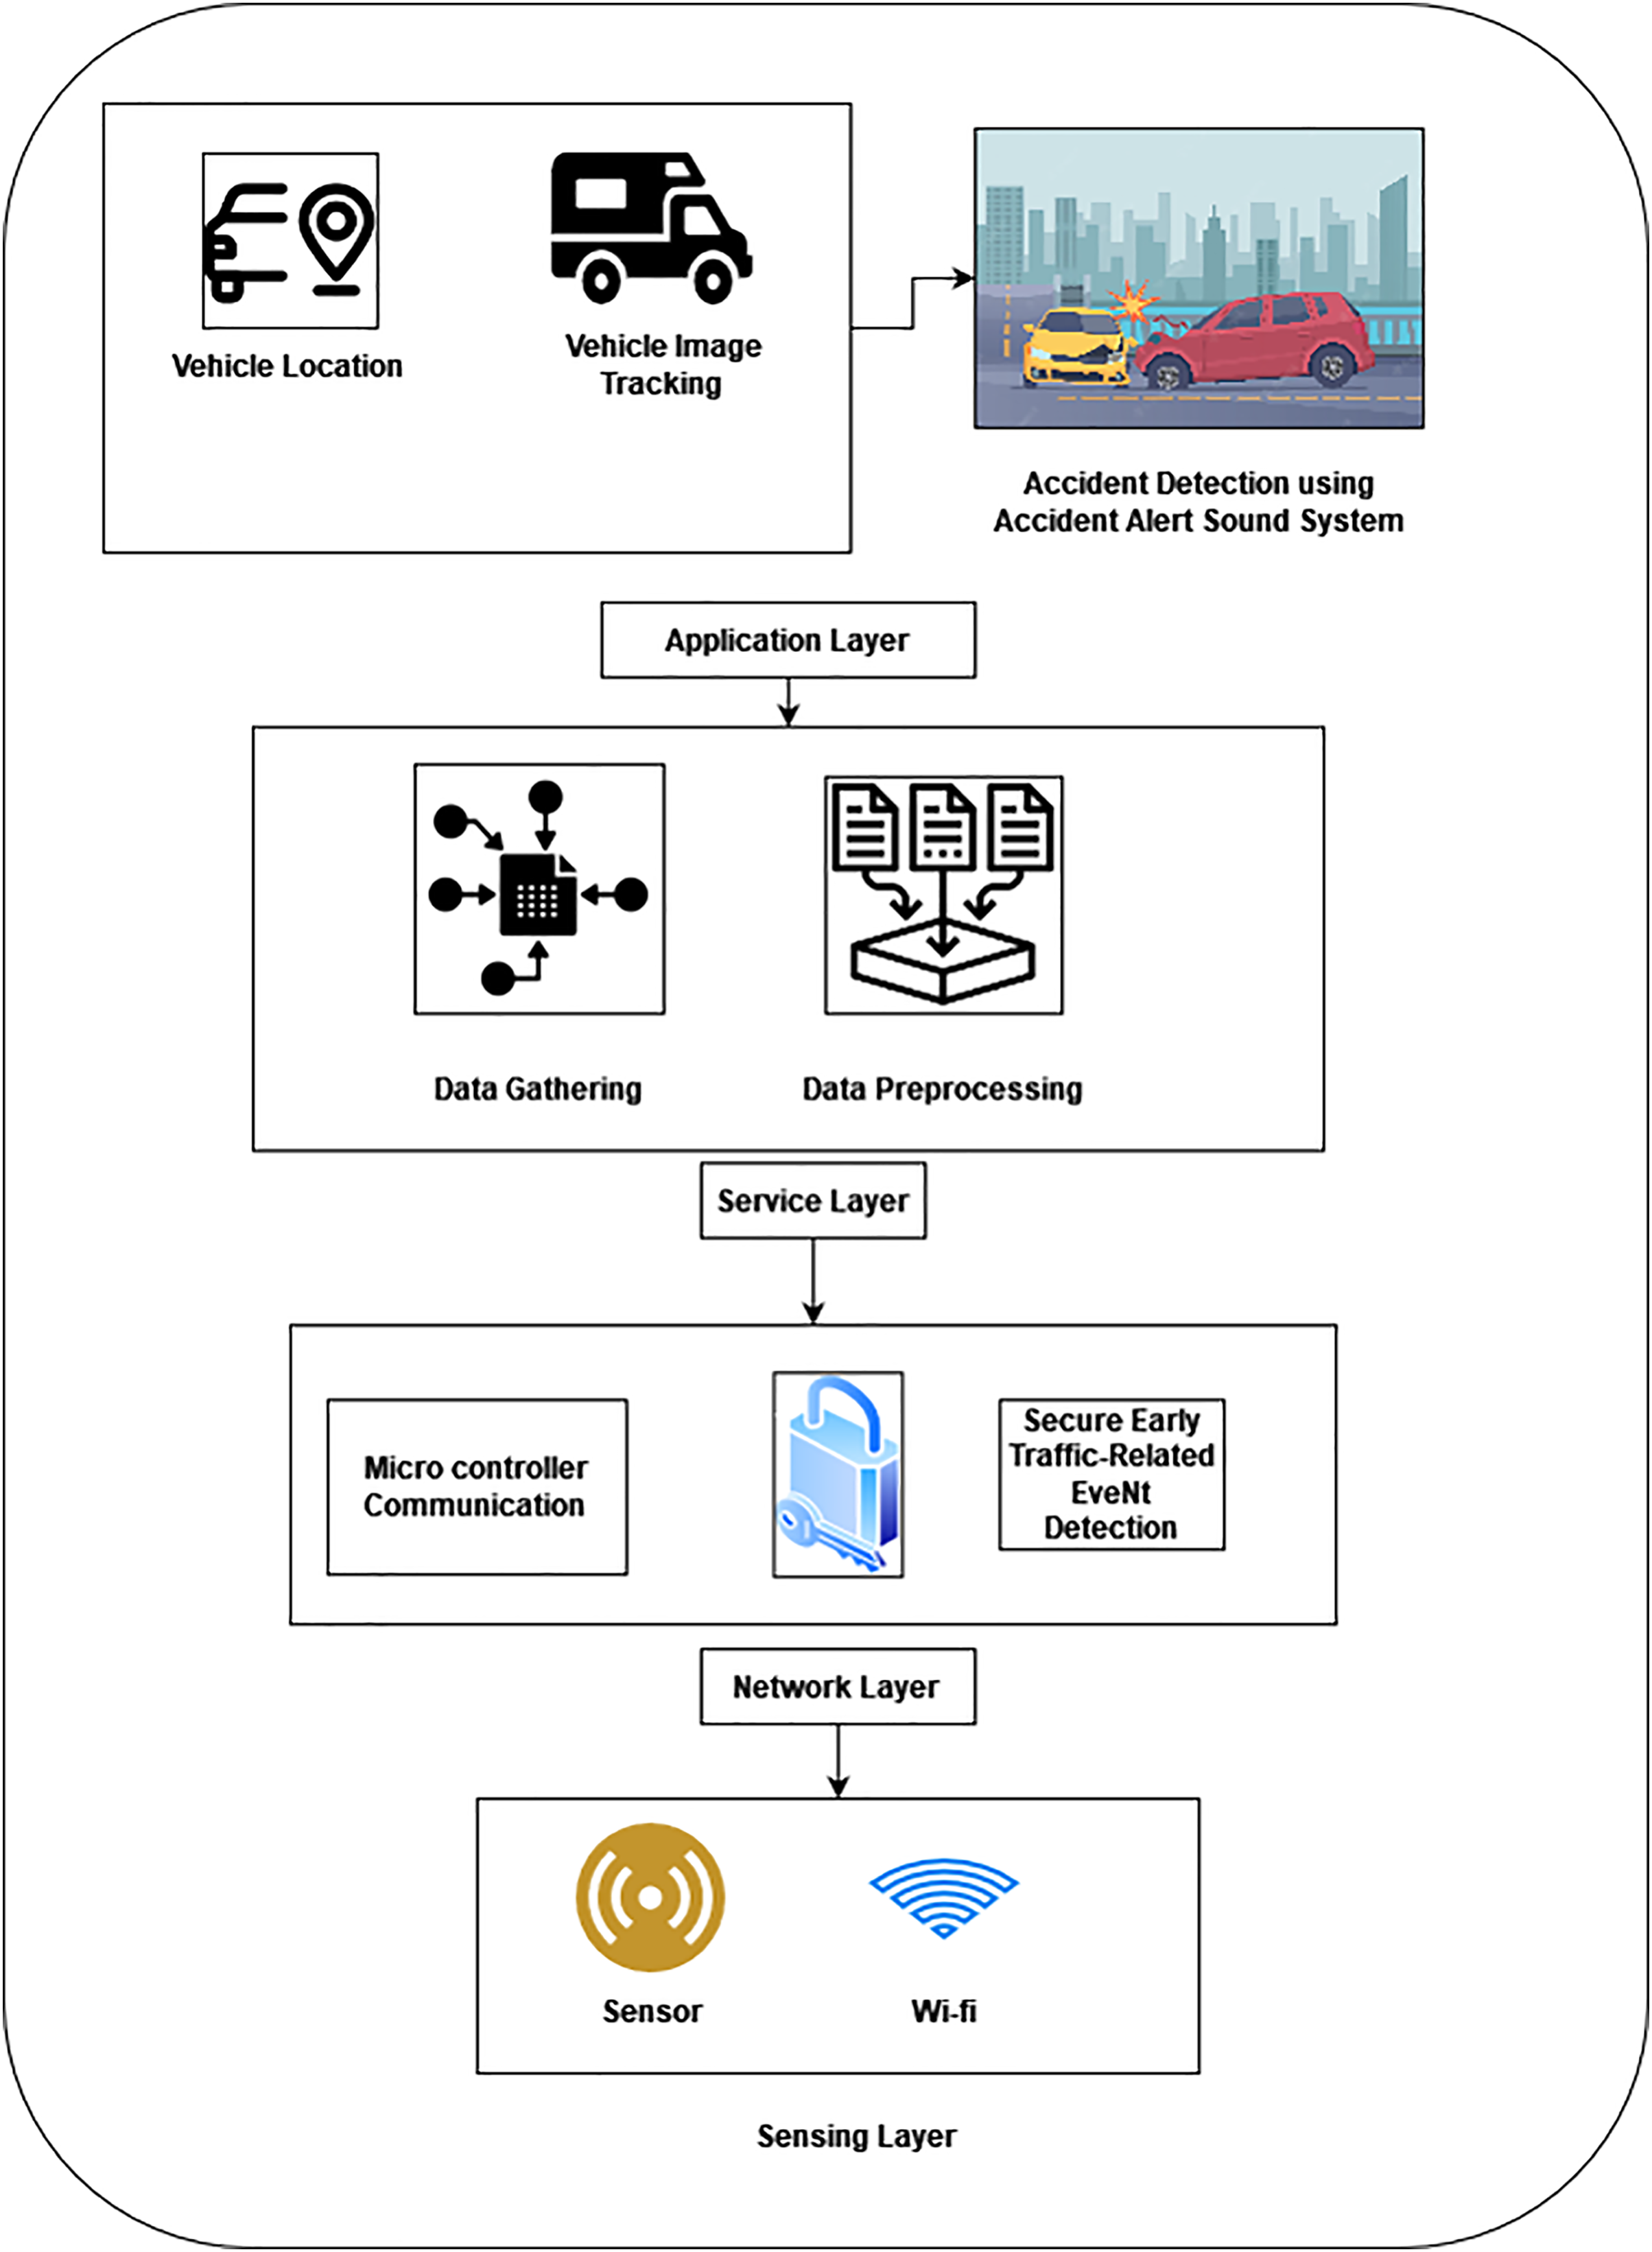 Machine learning based IoT system for secure traffic management and  accident detection in smart cities [PeerJ]